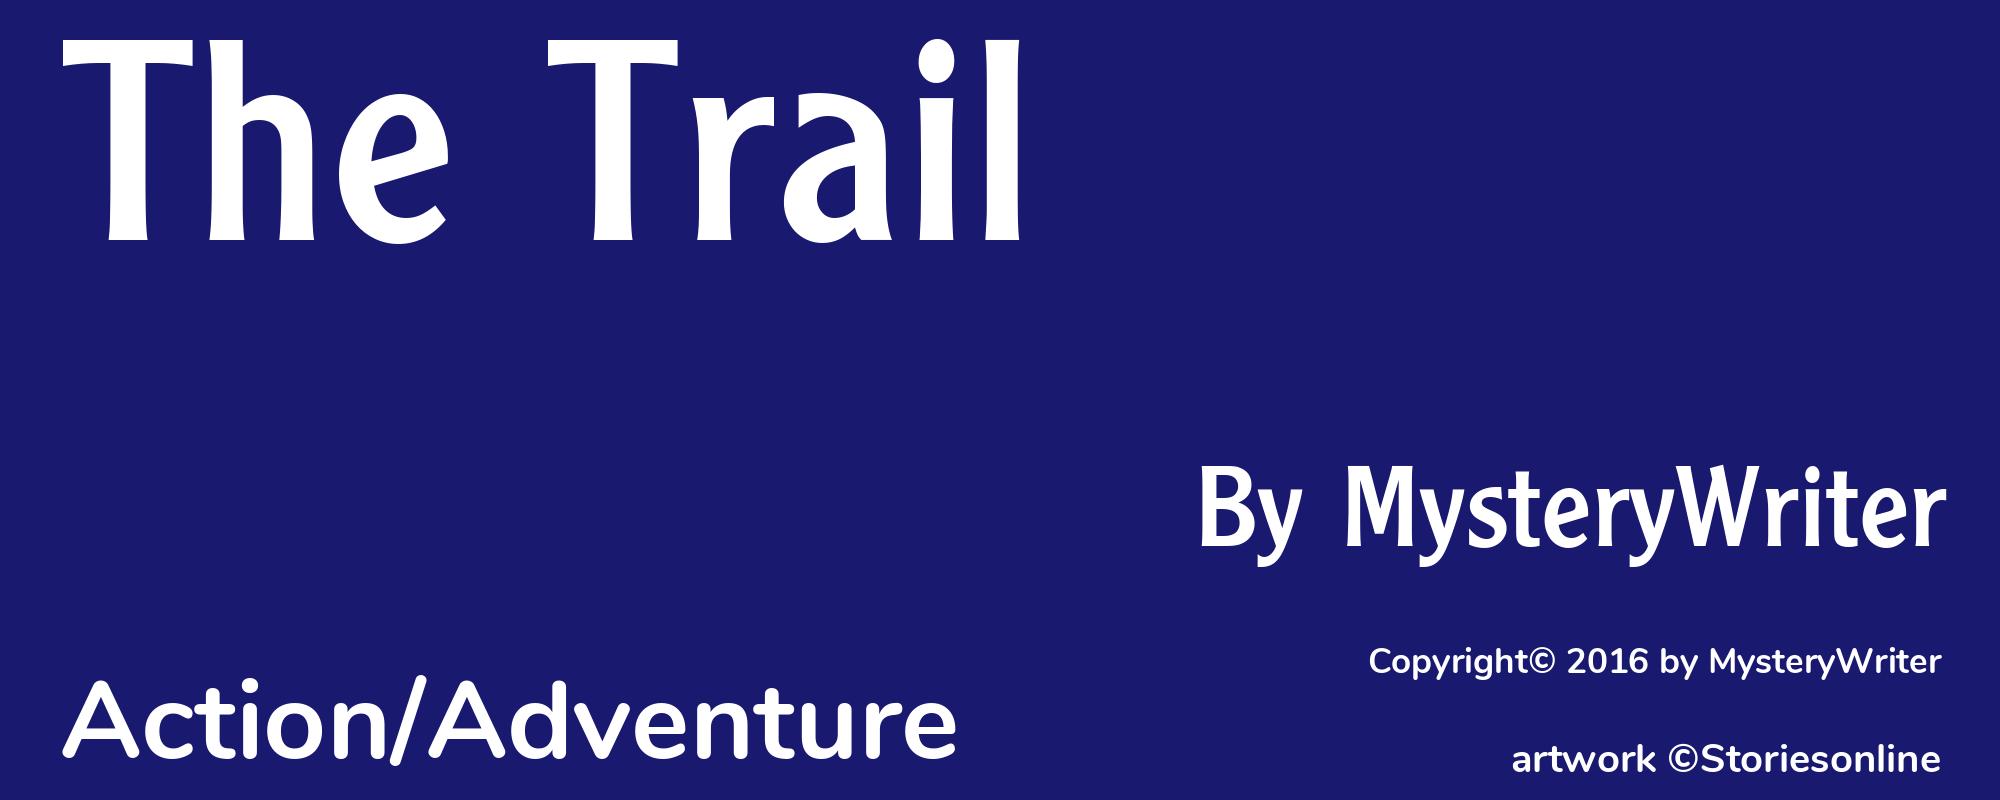 The Trail - Cover